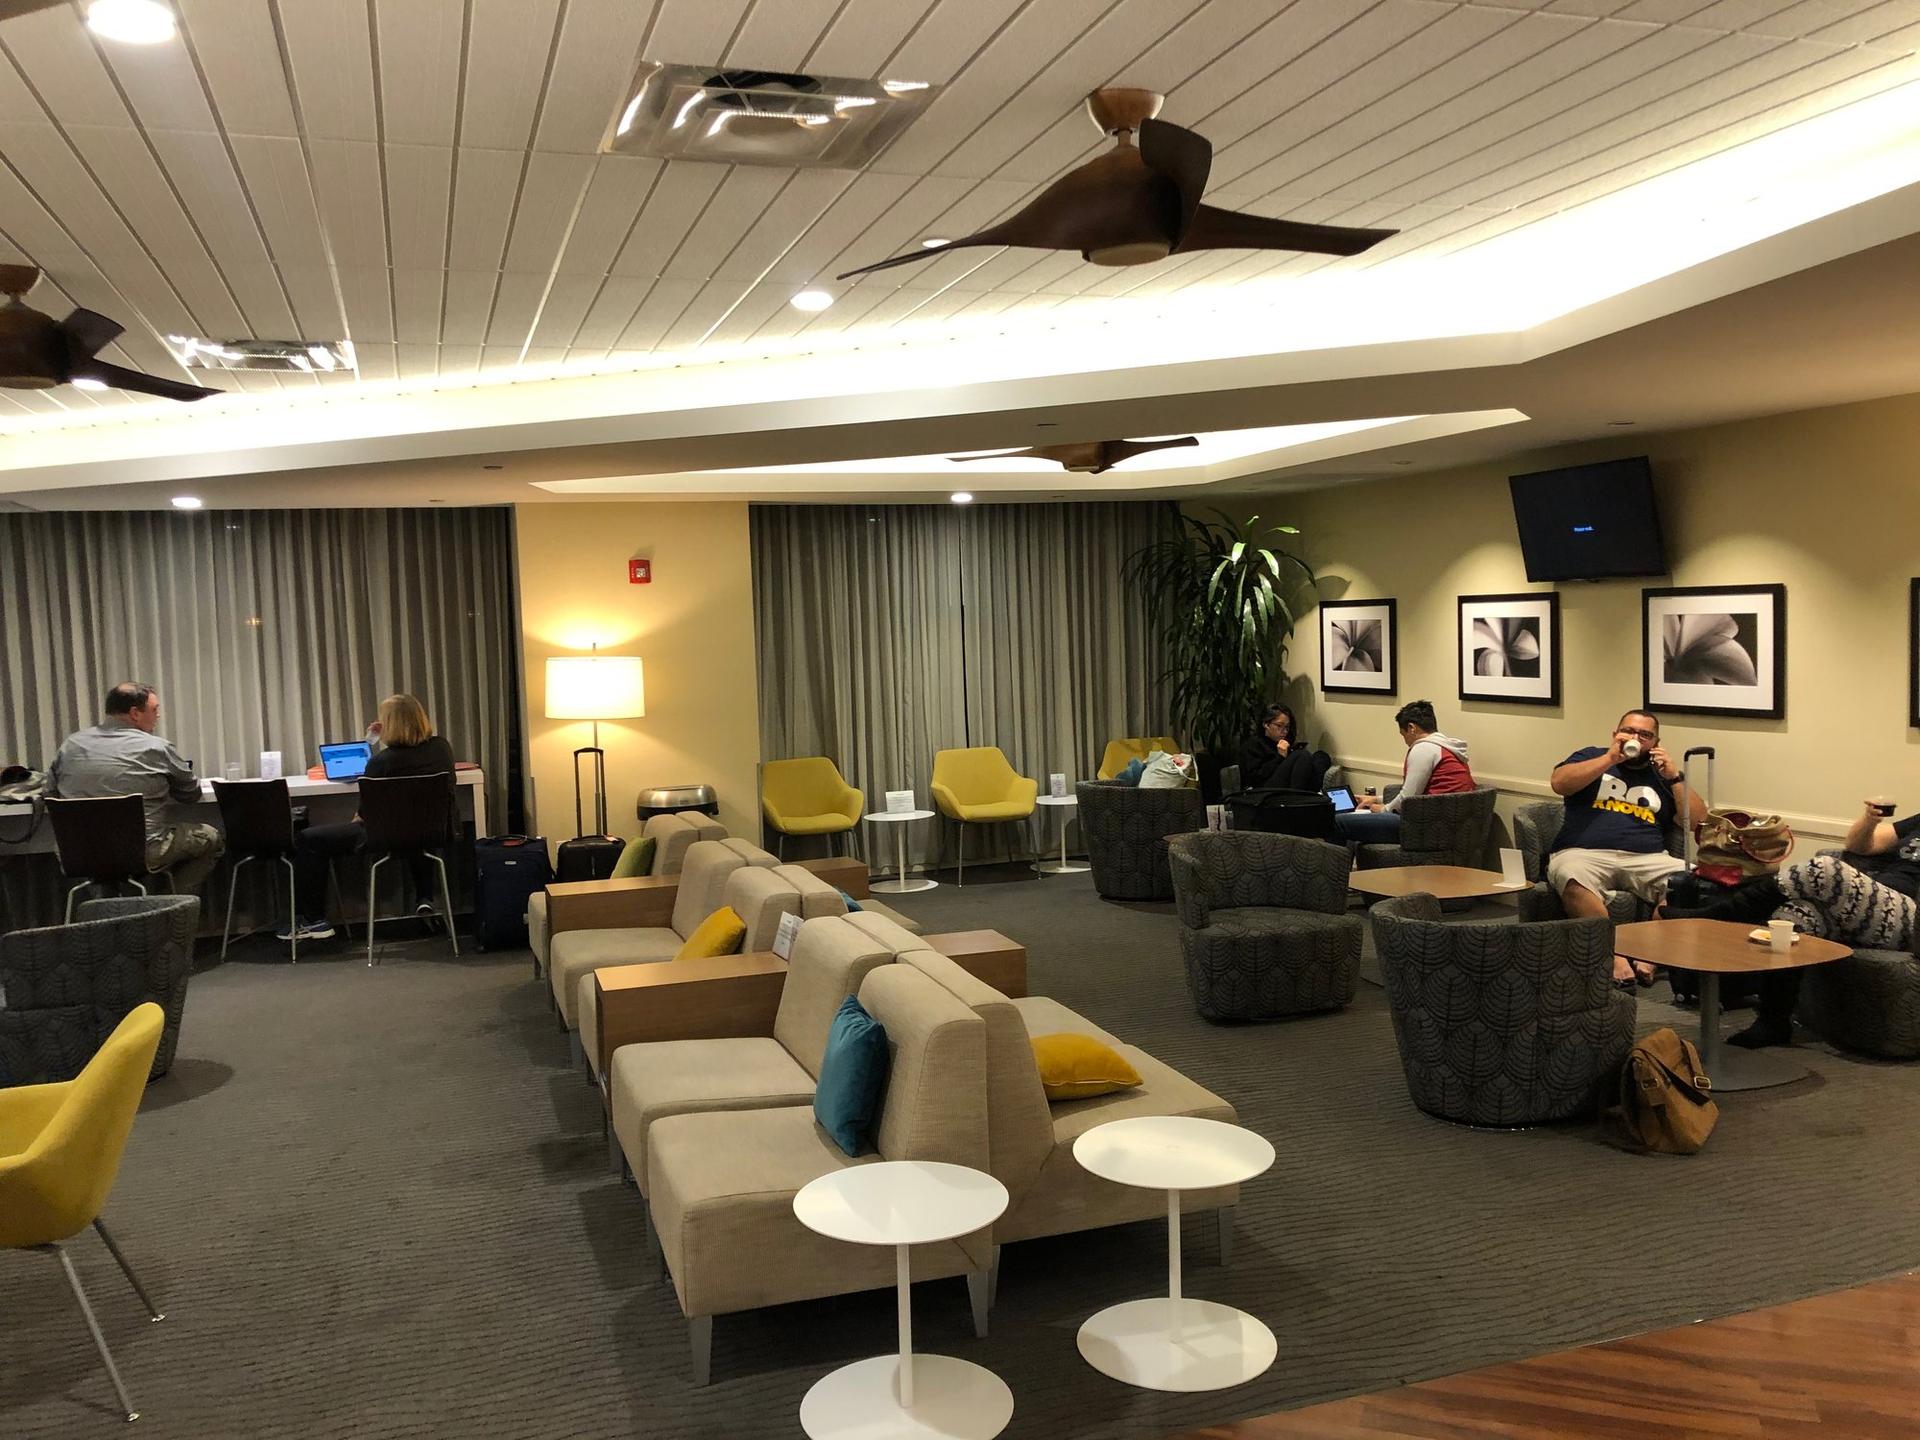 Hawaiian Airlines The Plumeria Lounge image 30 of 41